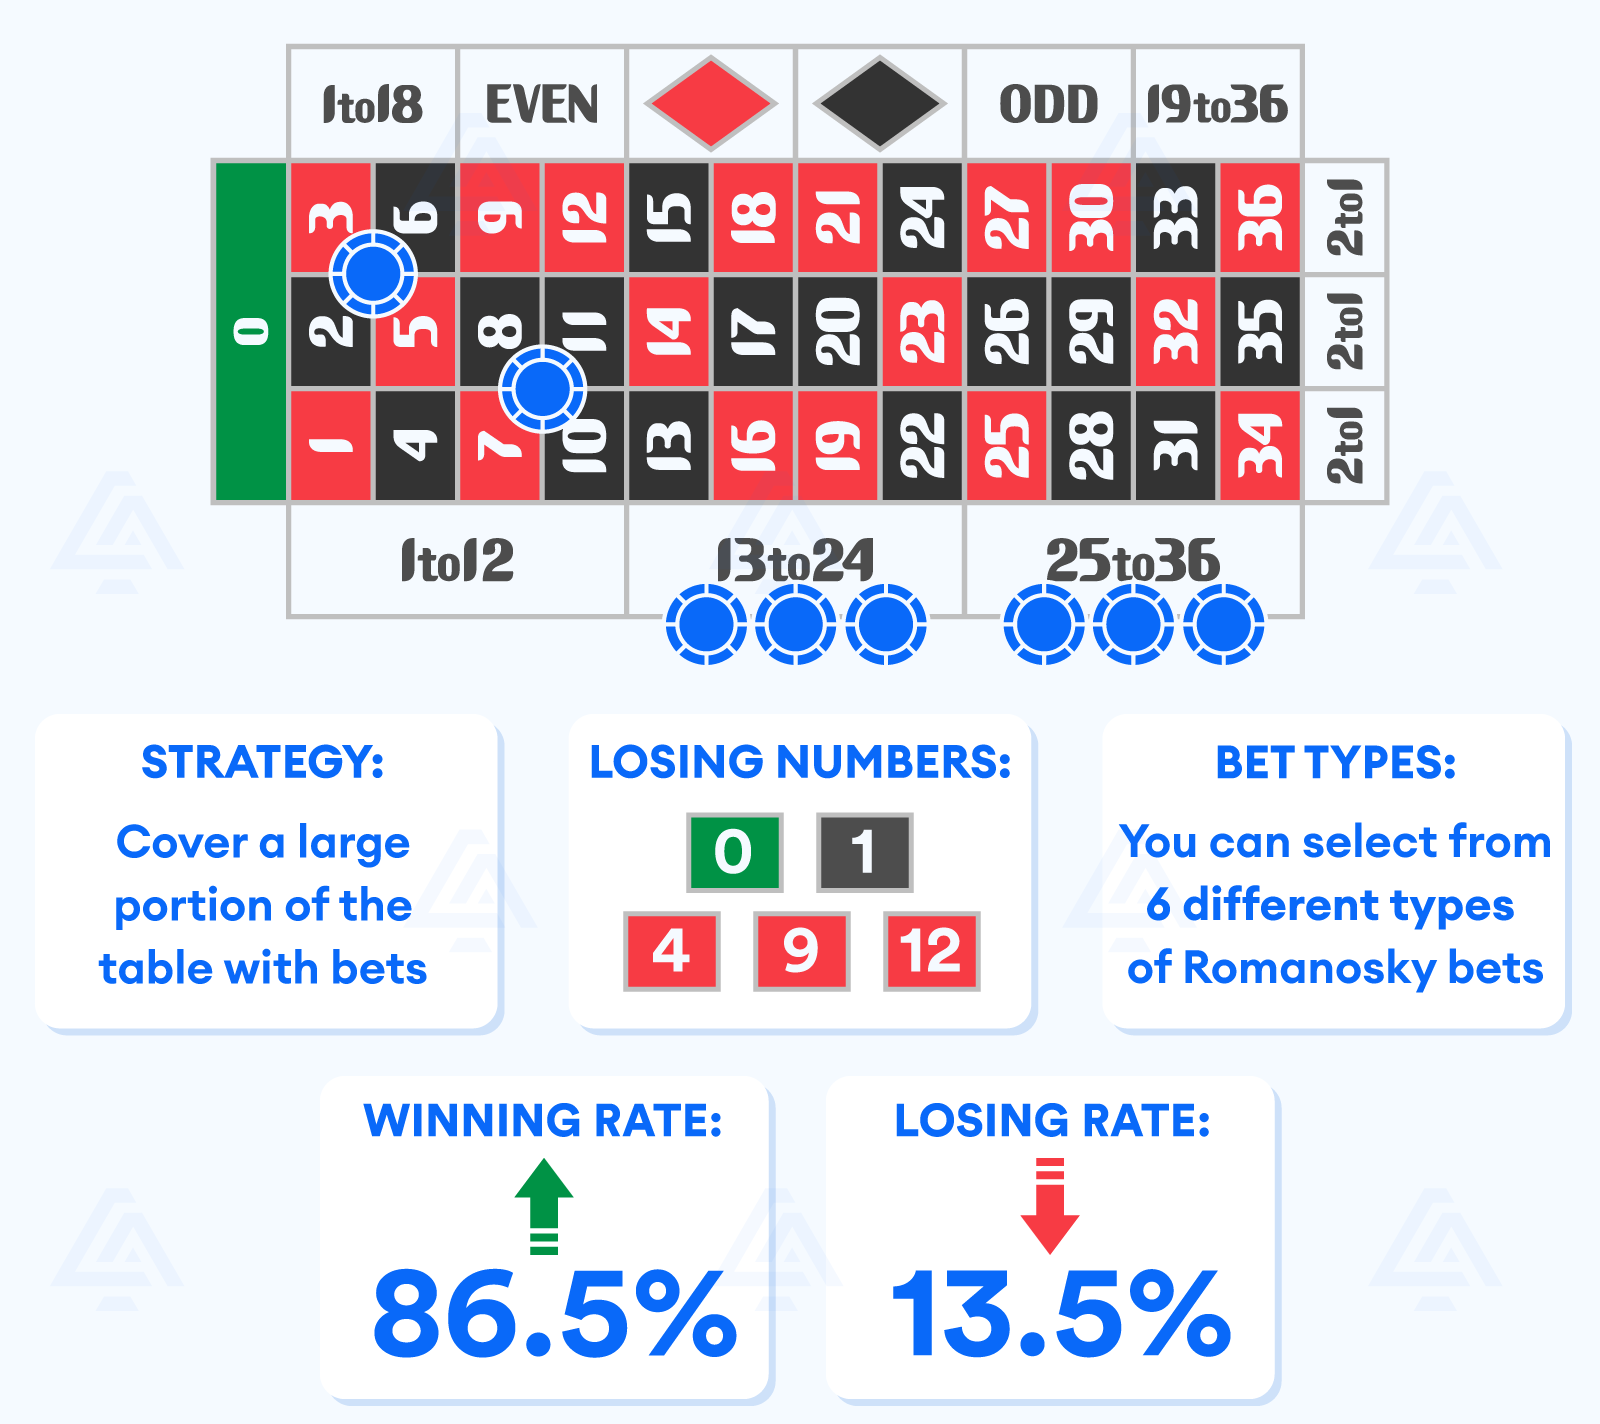 What's the role of chance in Roulette strategy?